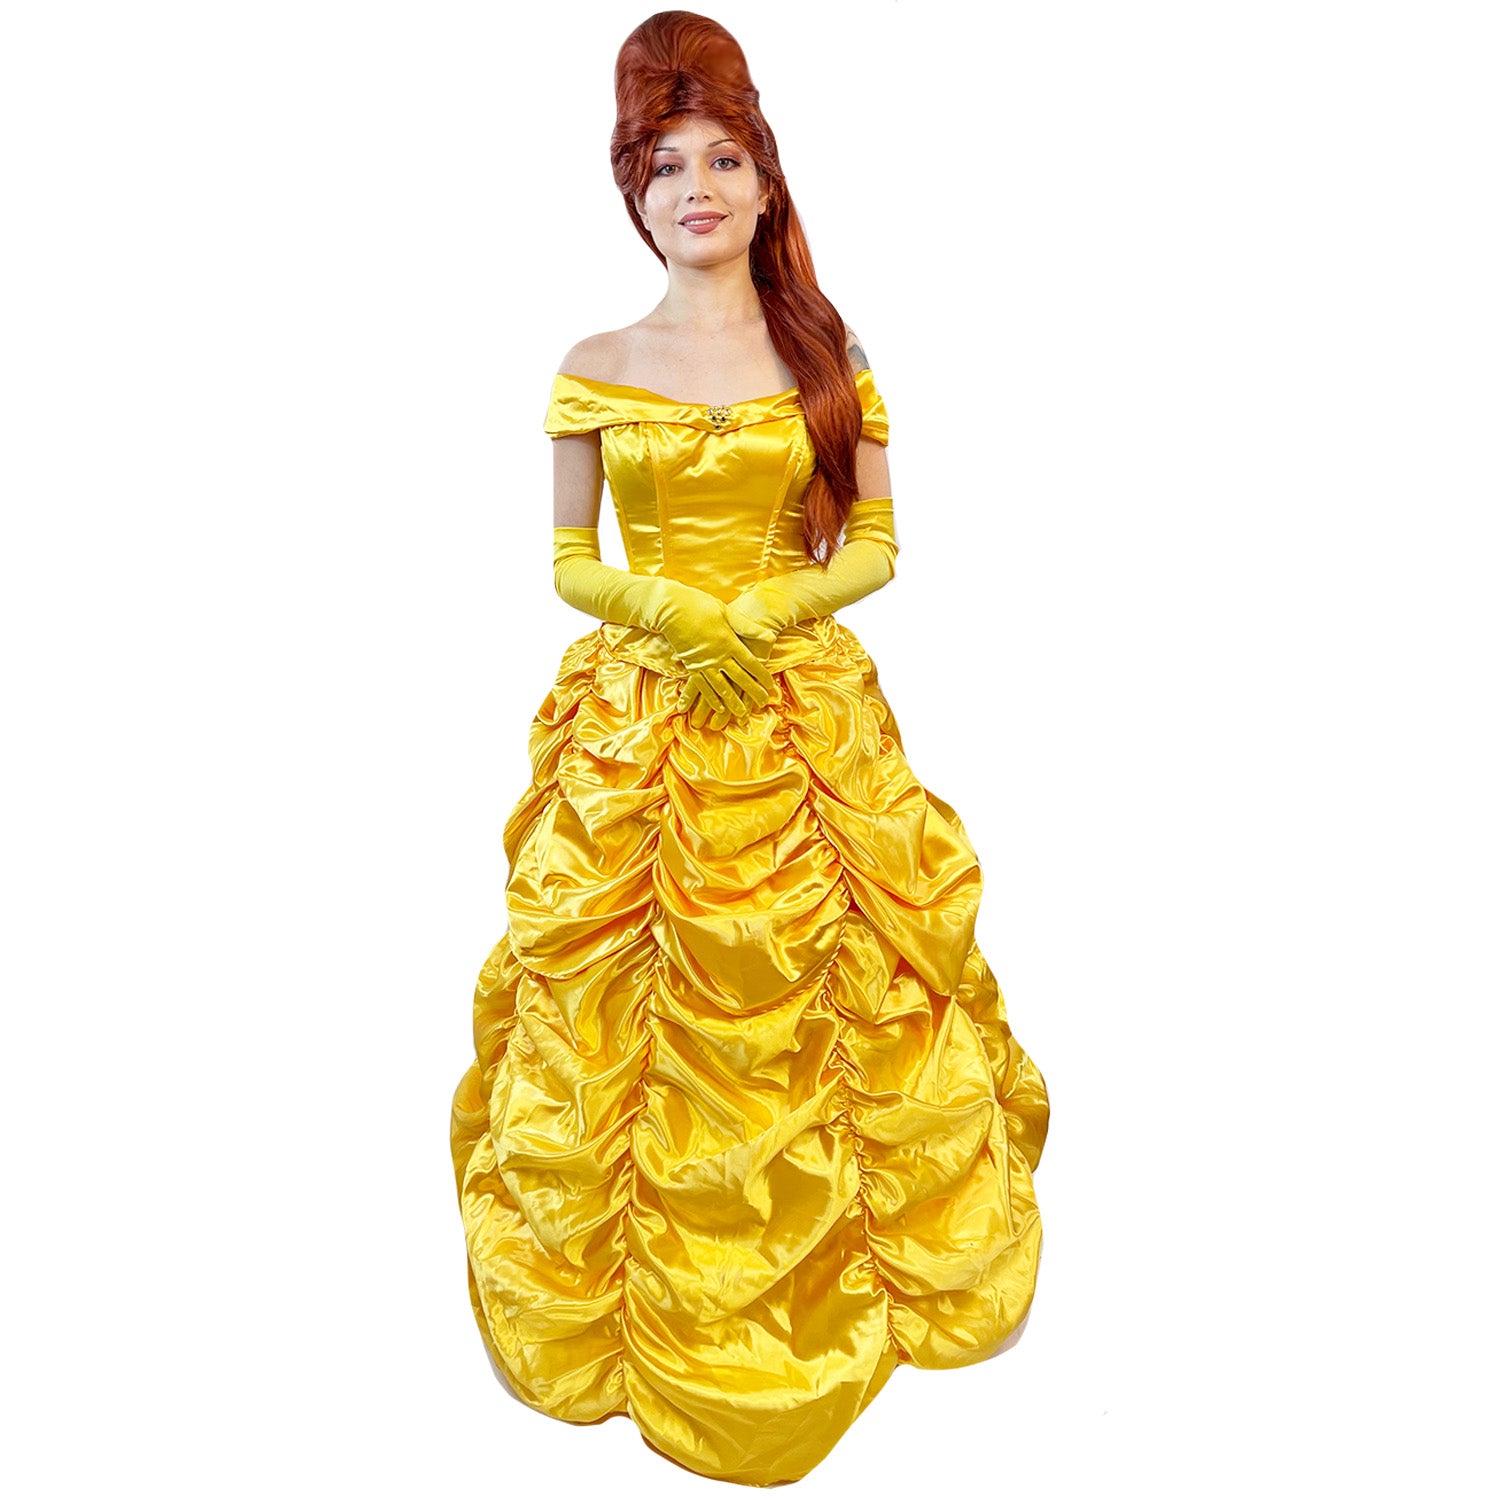 Exclusive Belle of the Ball Women's Ballroom Beauty Adult Costume